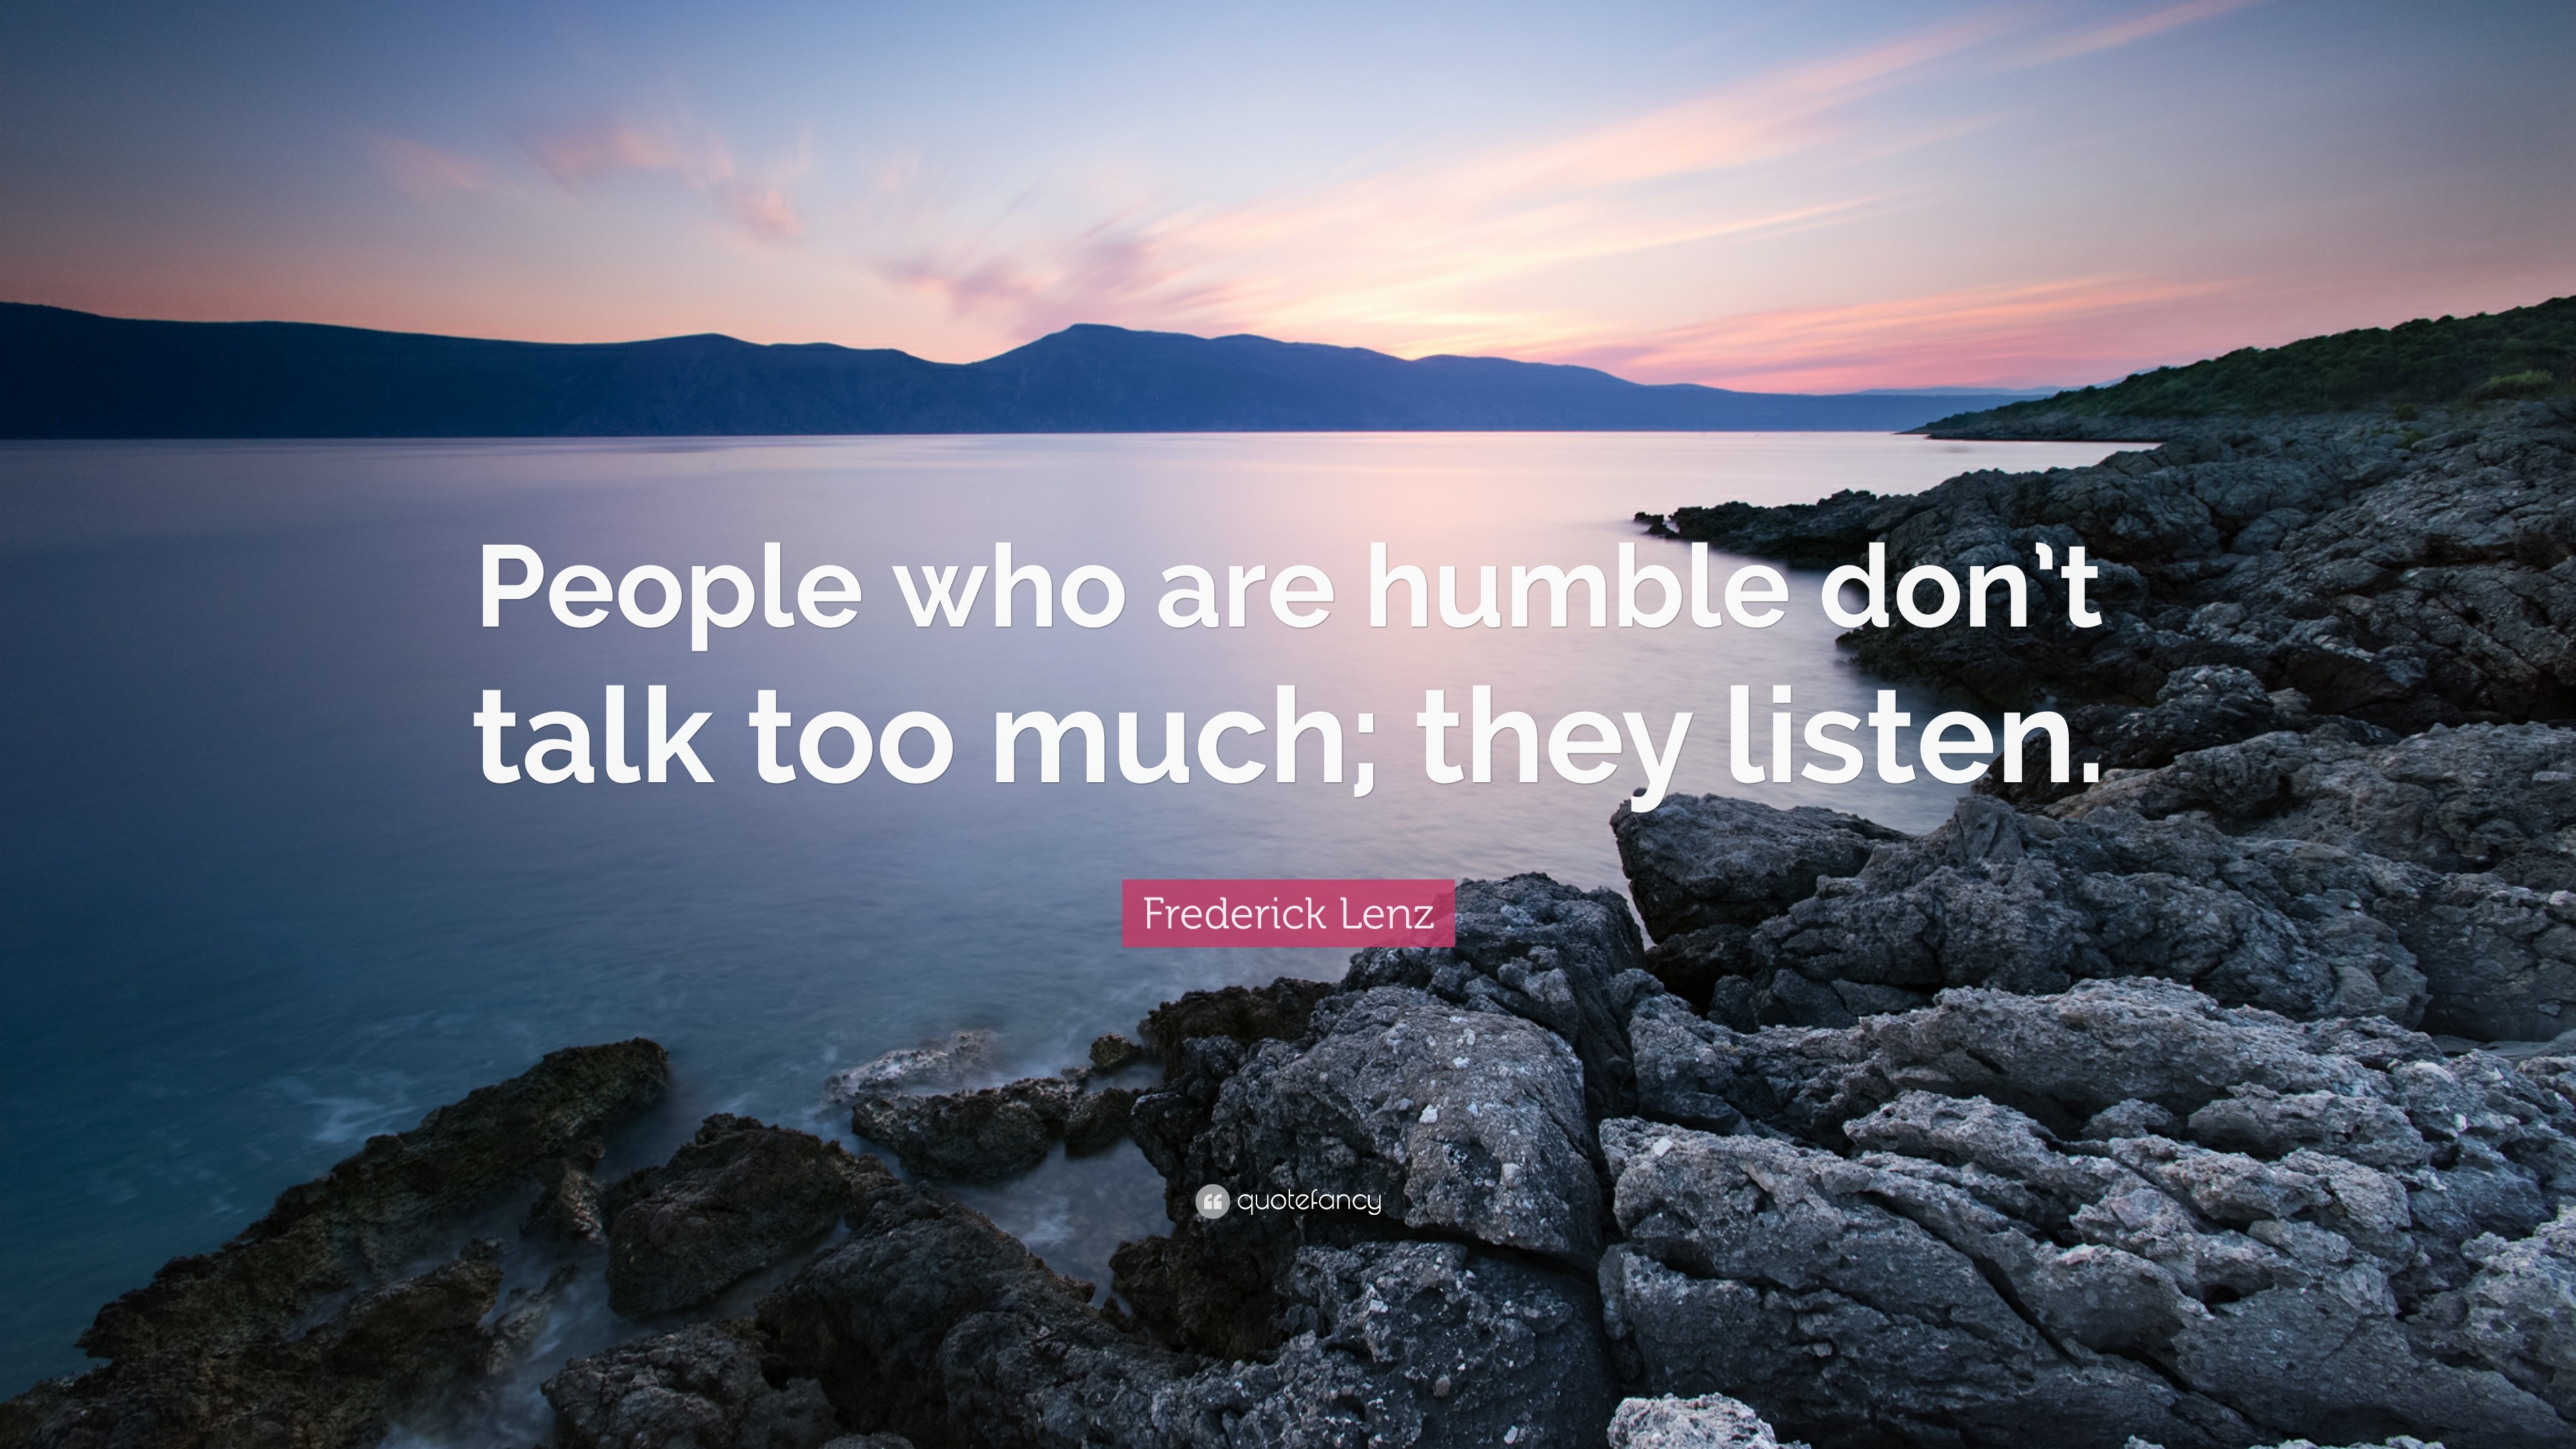 Frederick Lenz Quote: “People who are humble don’t talk too much; they ...